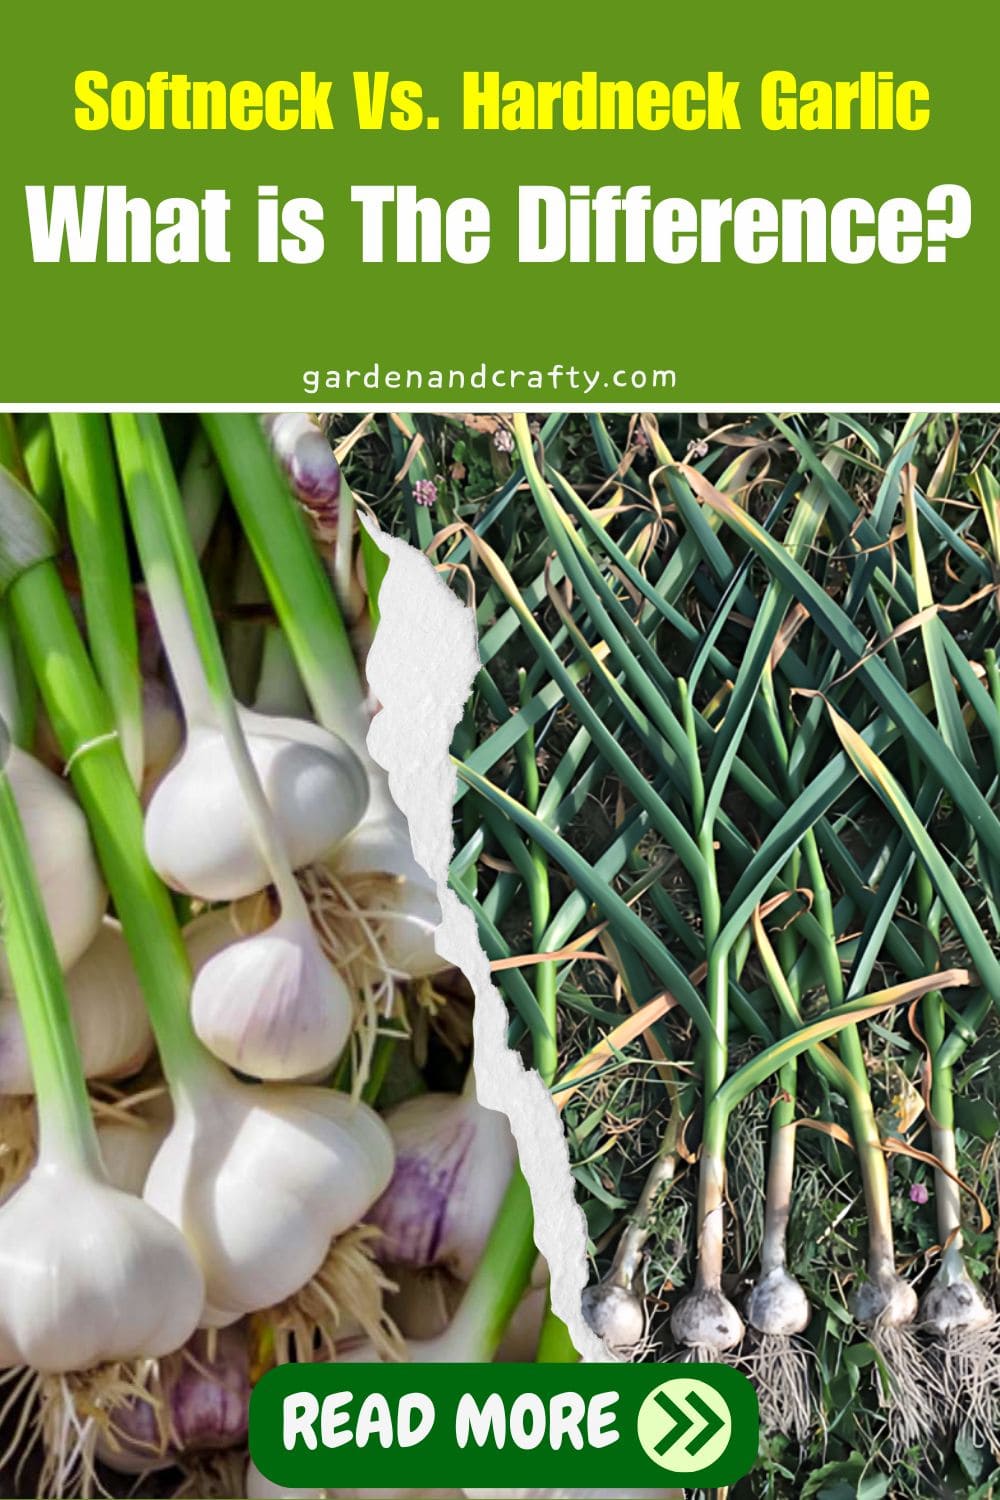 Softneck Vs. Hardneck Garlic: What Is The Difference?